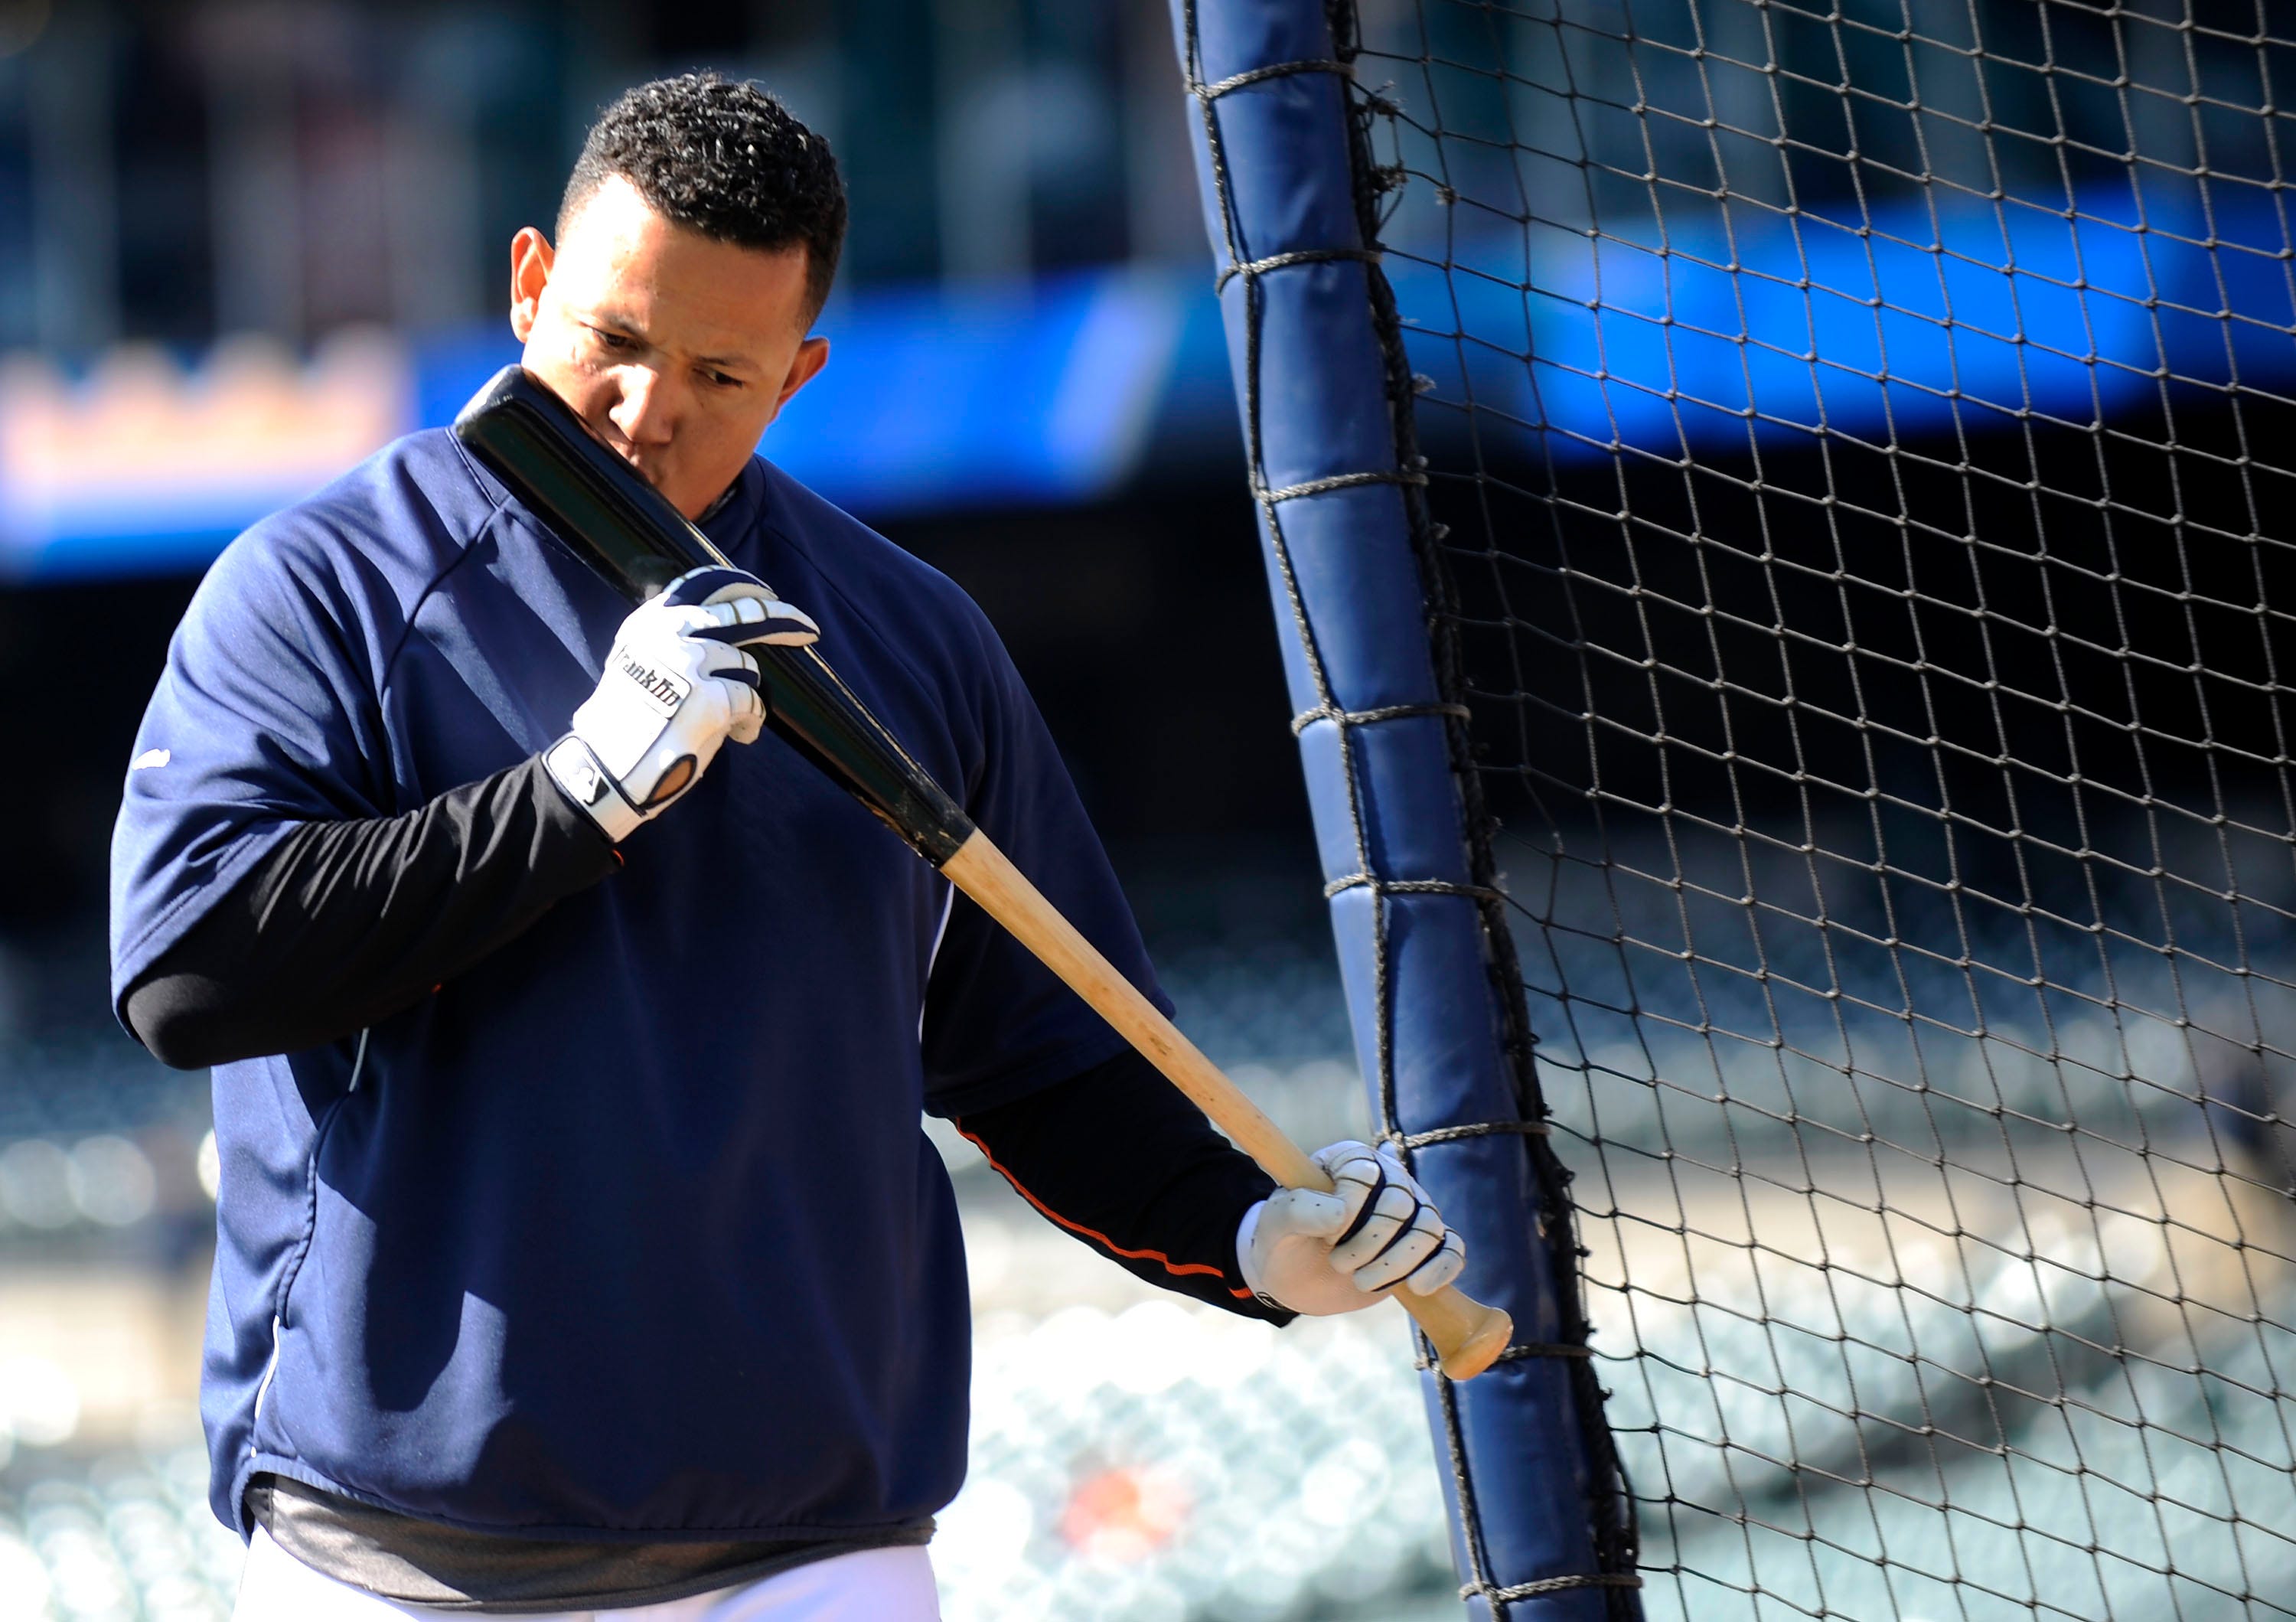 Tigers' Miguel Cabrera kisses his bat during batting practice before Monday's season opener against Kansas City Royals. Photos of Detroit Tigers Opening Day on Monday, March 31, 2014 at Comerica Park in Detroit.